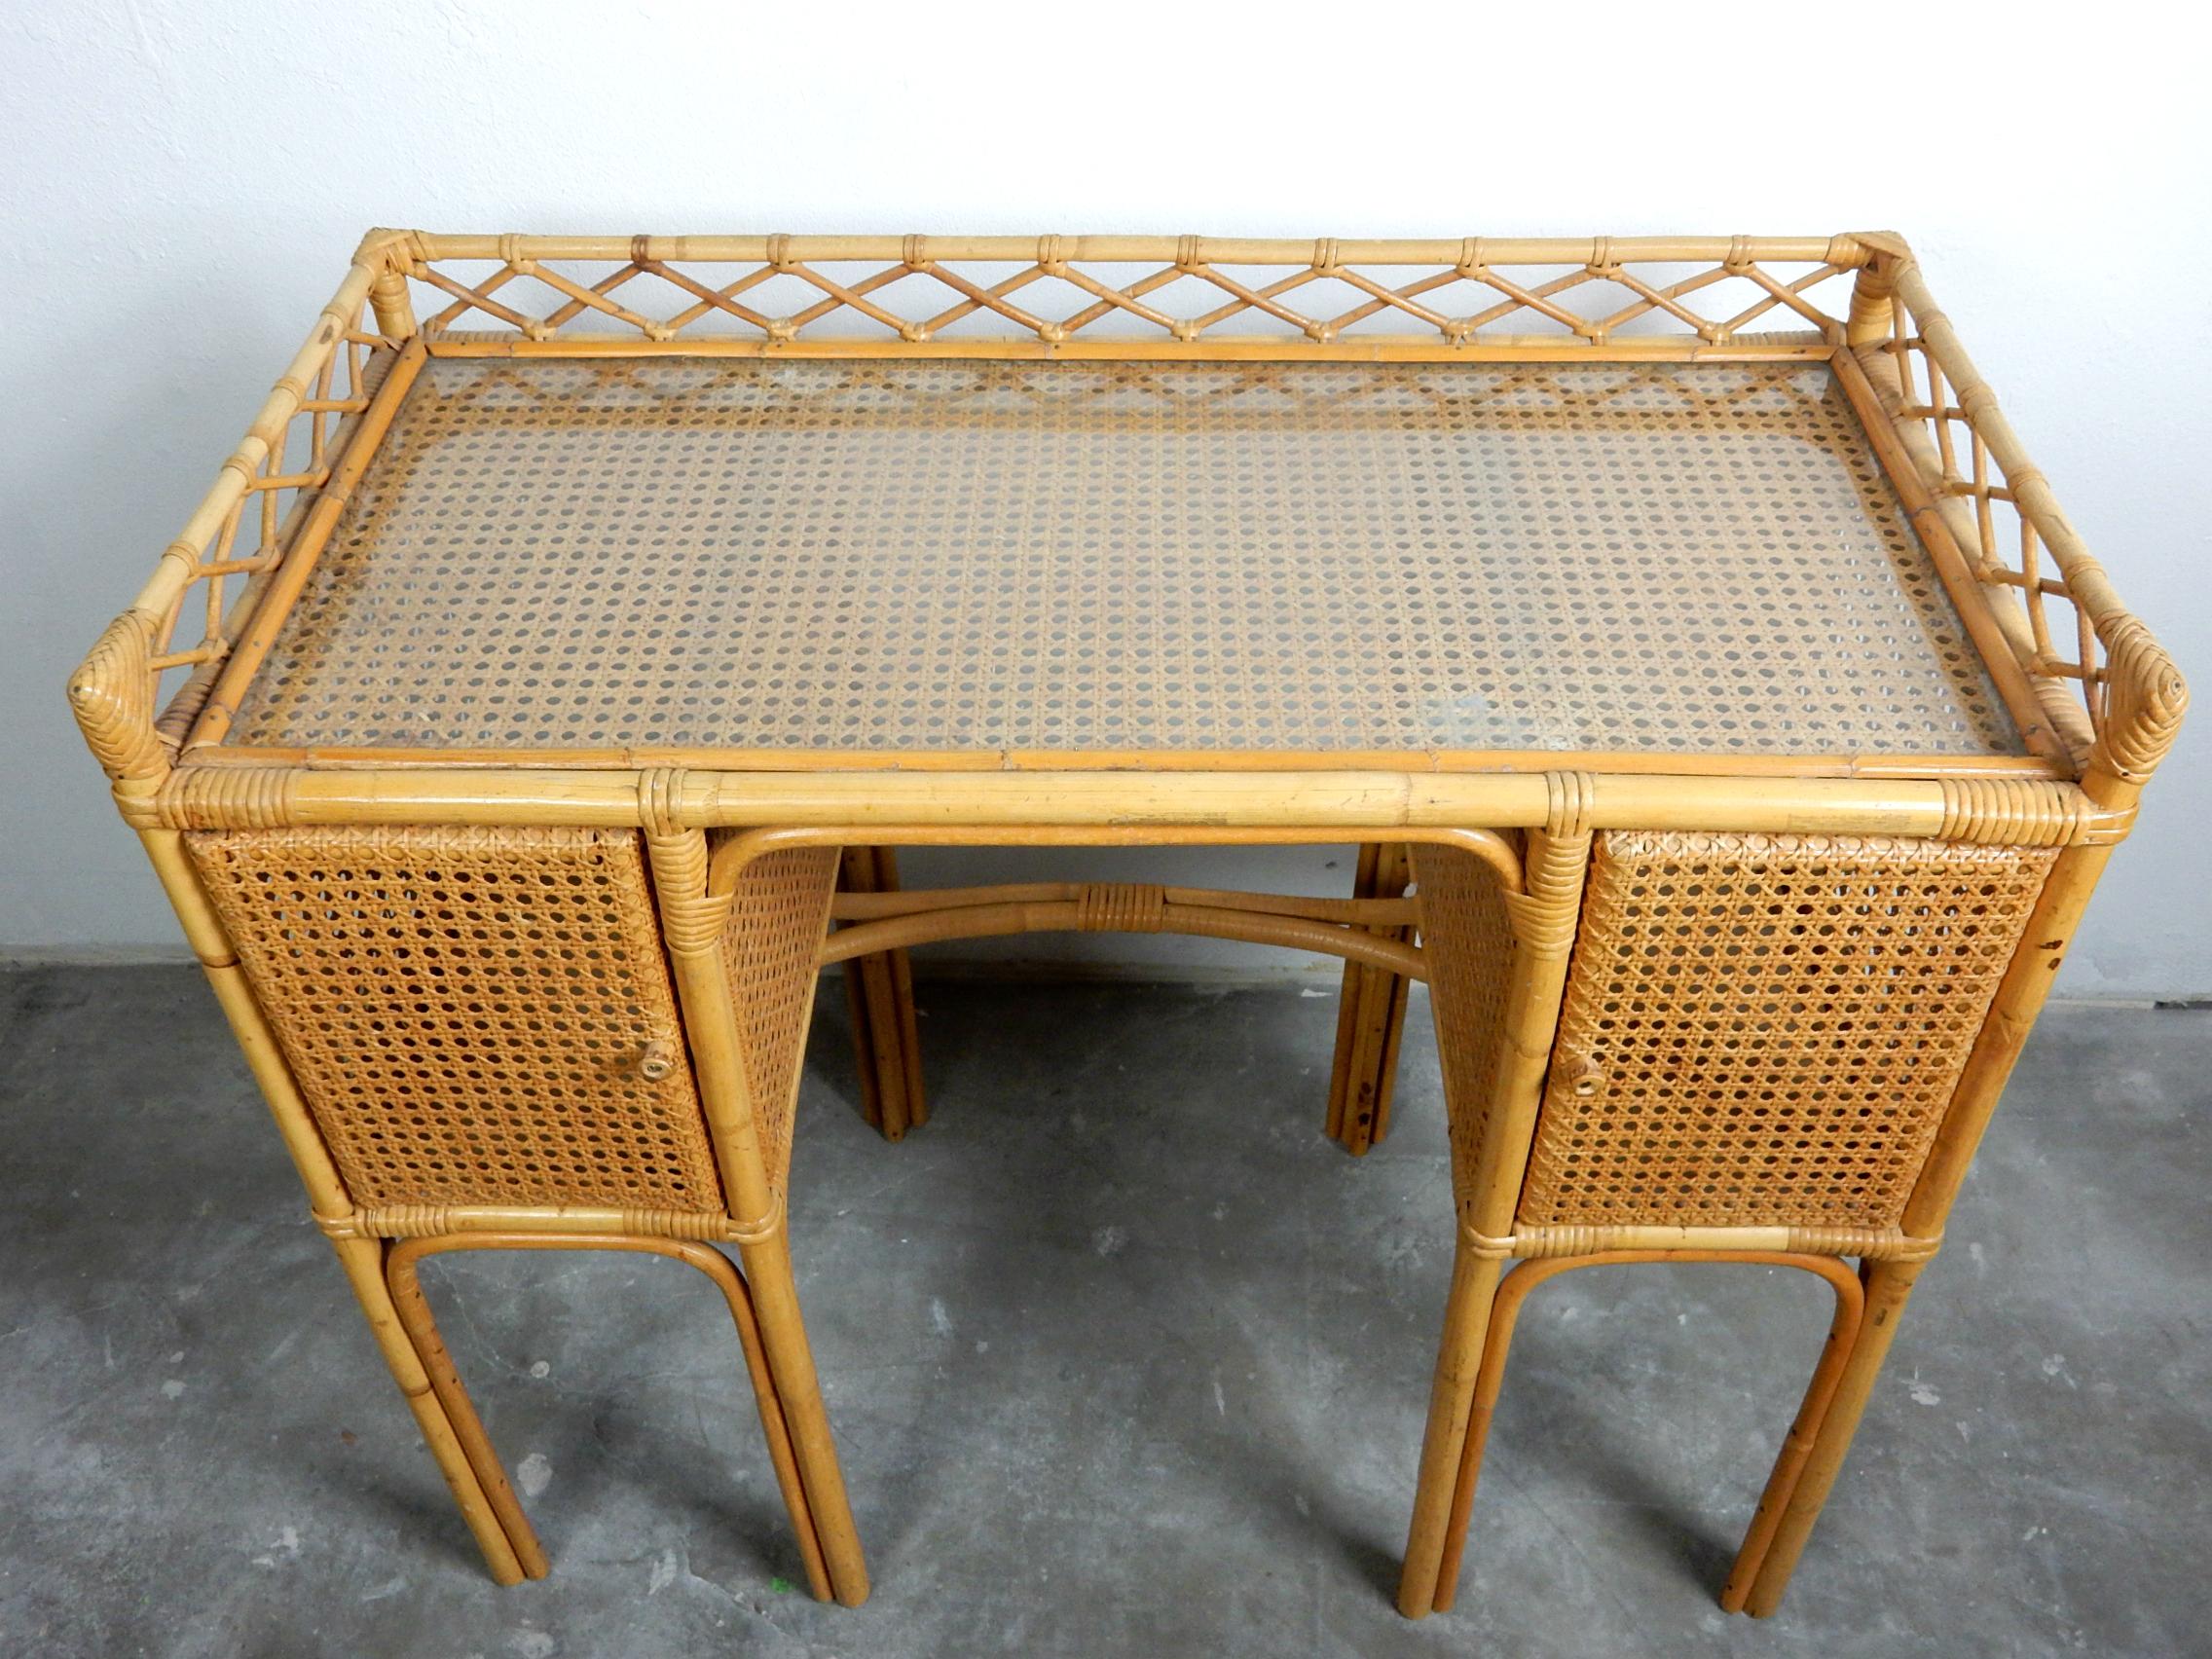 Gorgeous little letter desk constructed of bent cane wrapped in cane wicker.
Possibly from West Indies, circa 1950.
Glass writing top. Every part of this gem is as it was when created.